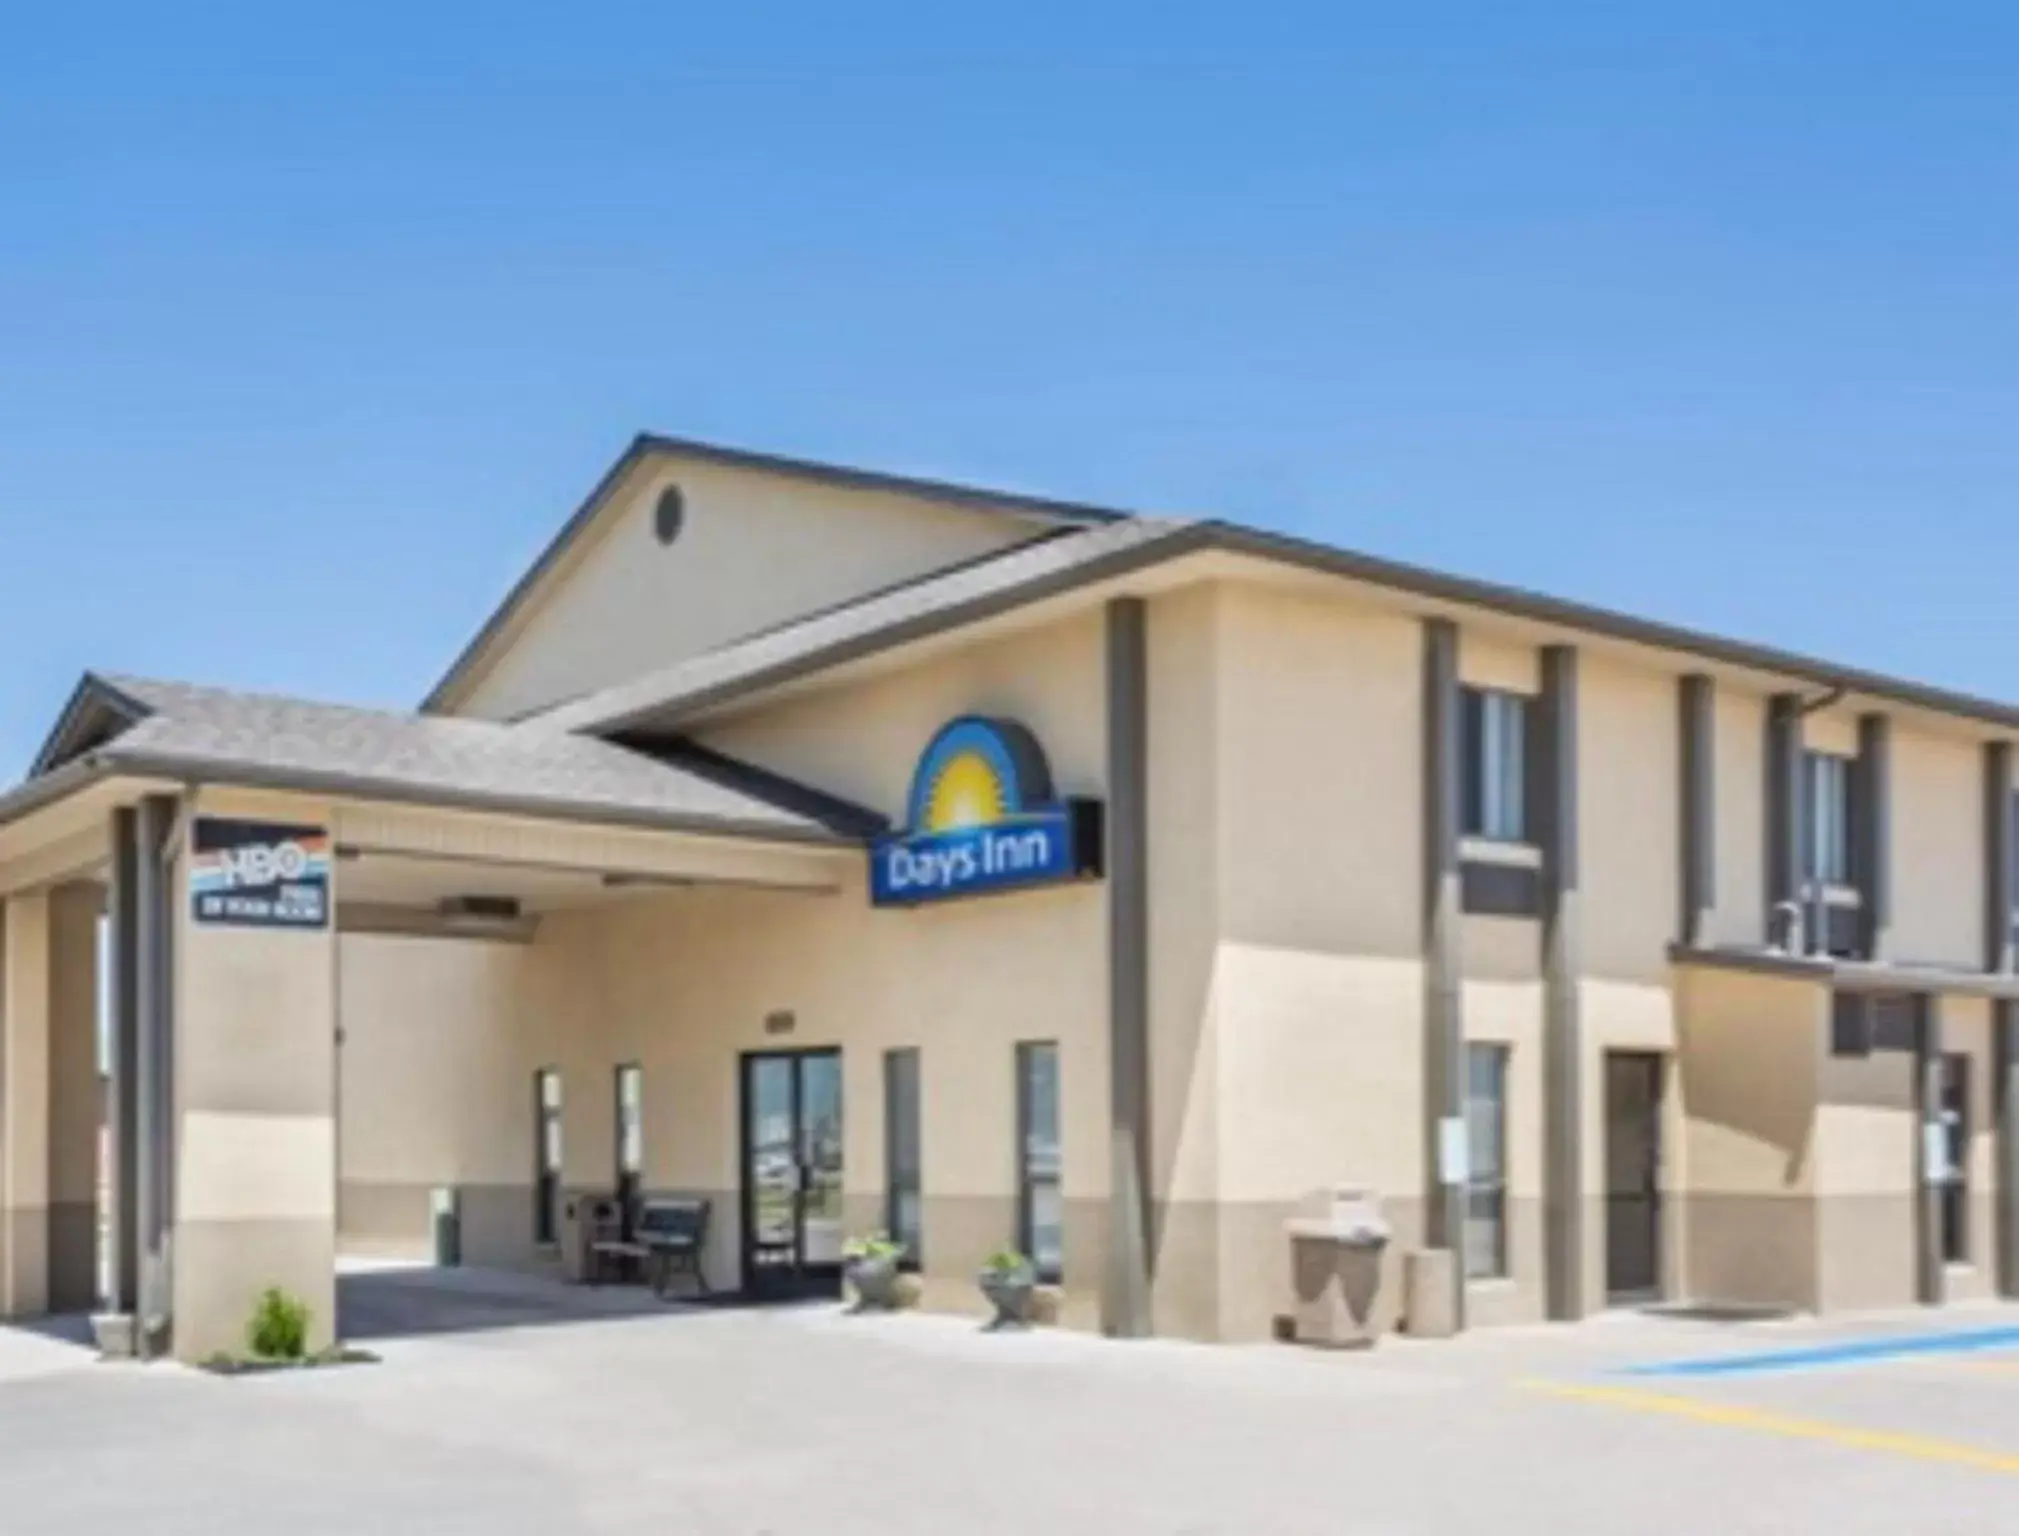 Facade/entrance, Property Building in Days Inn by Wyndham Colby